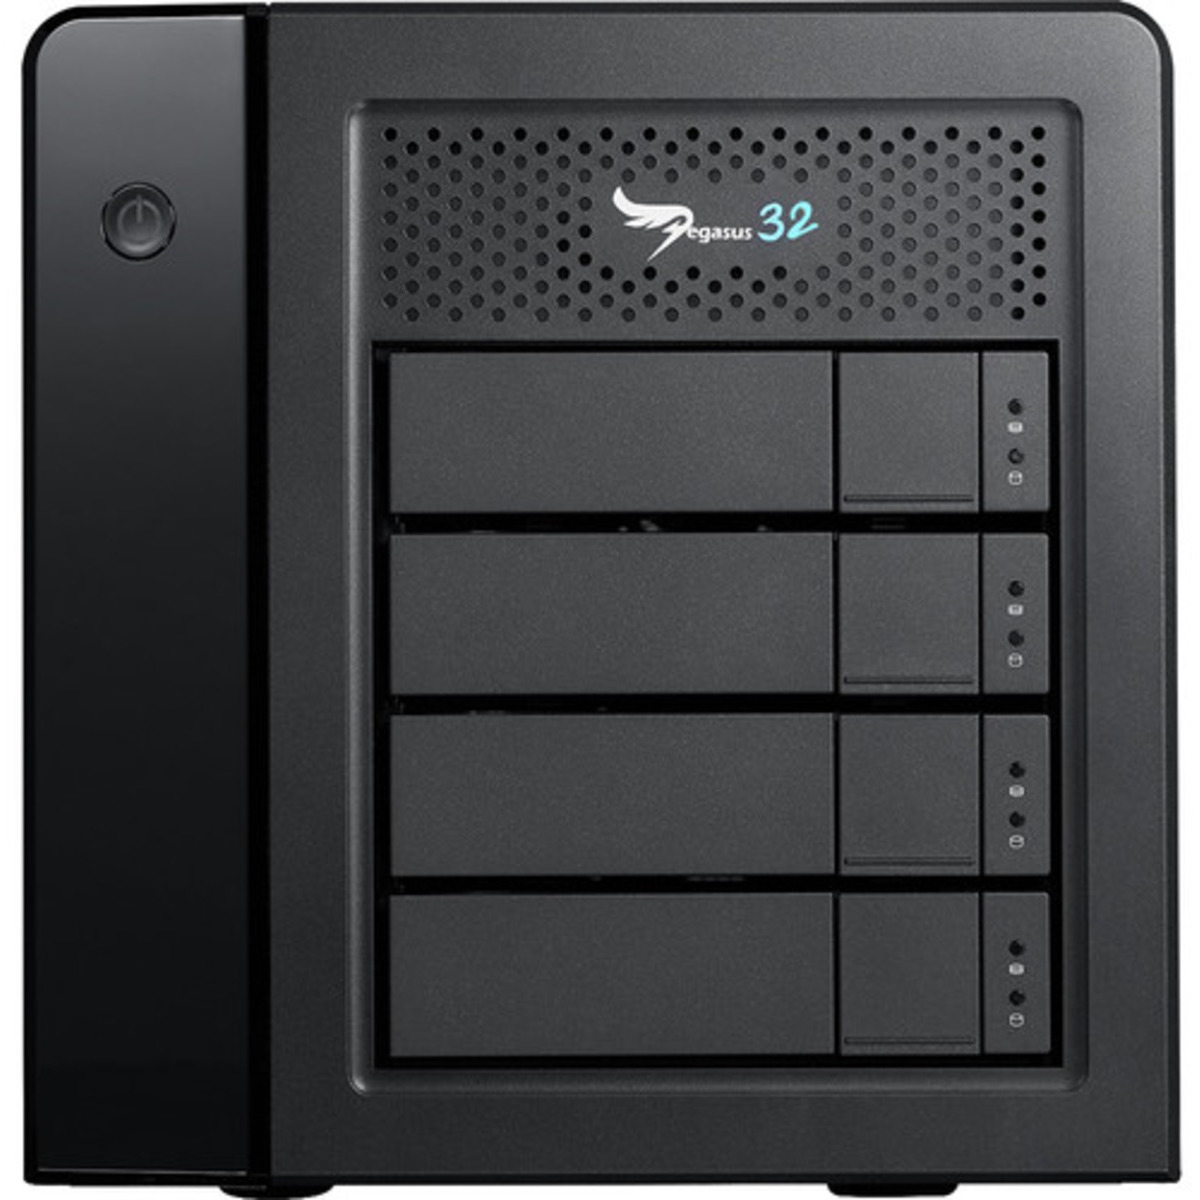 Promise Technology Pegasus32 R4 Thunderbolt 3 48tb 4-Bay Desktop Multimedia / Power User / Business DAS - Direct Attached Storage Device 3x16tb Seagate IronWolf Pro ST16000NT001 3.5 7200rpm SATA 6Gb/s HDD NAS Class Drives Installed - Burn-In Tested - ON SALE Pegasus32 R4 Thunderbolt 3